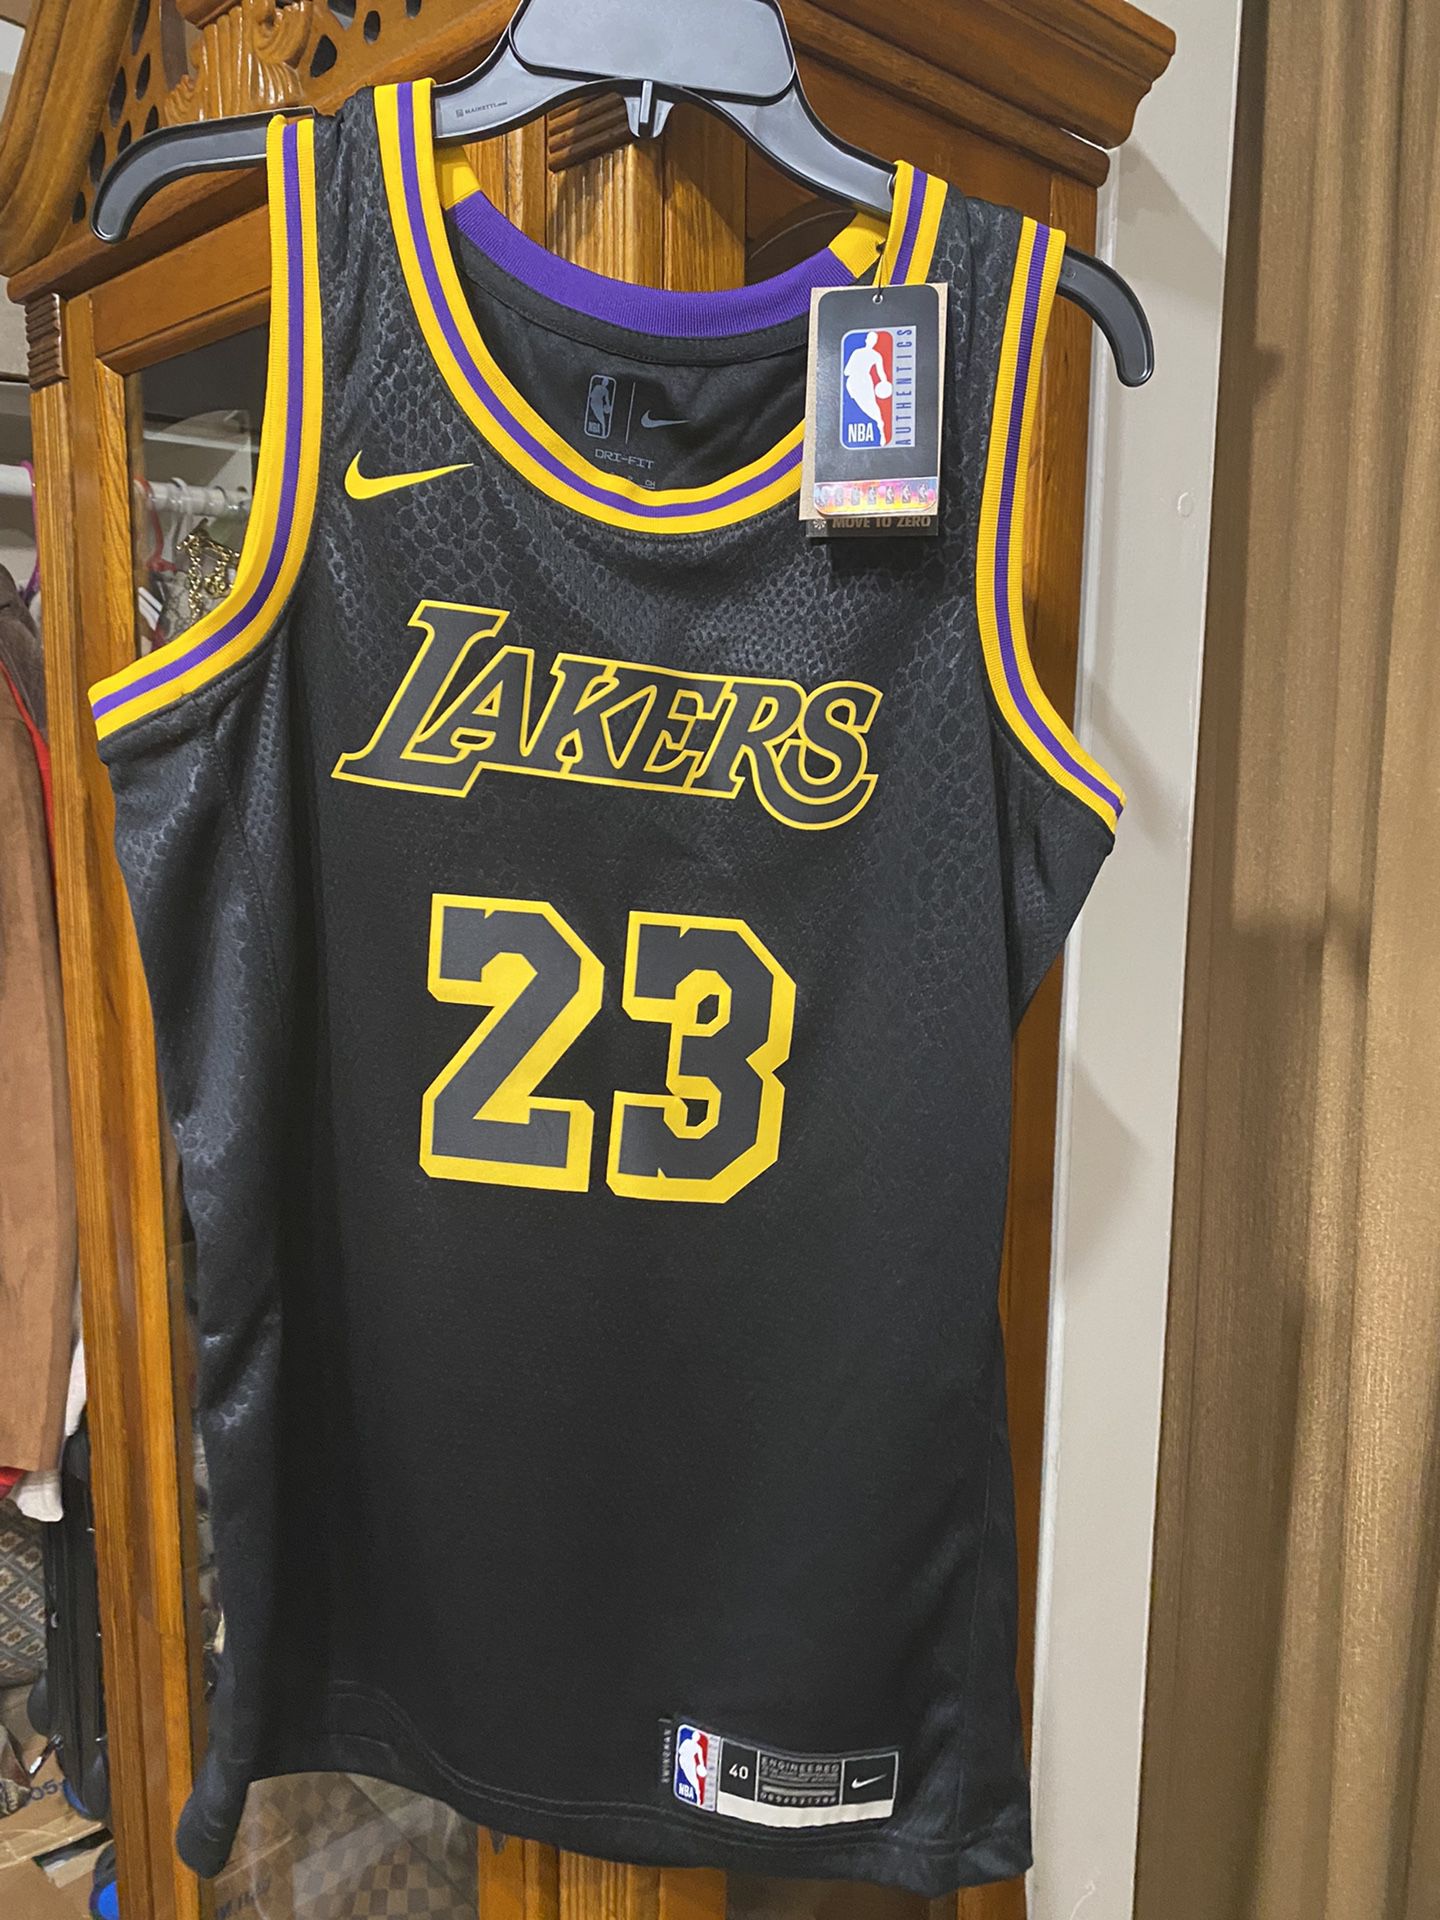 New Lakers Jersey Sz Small